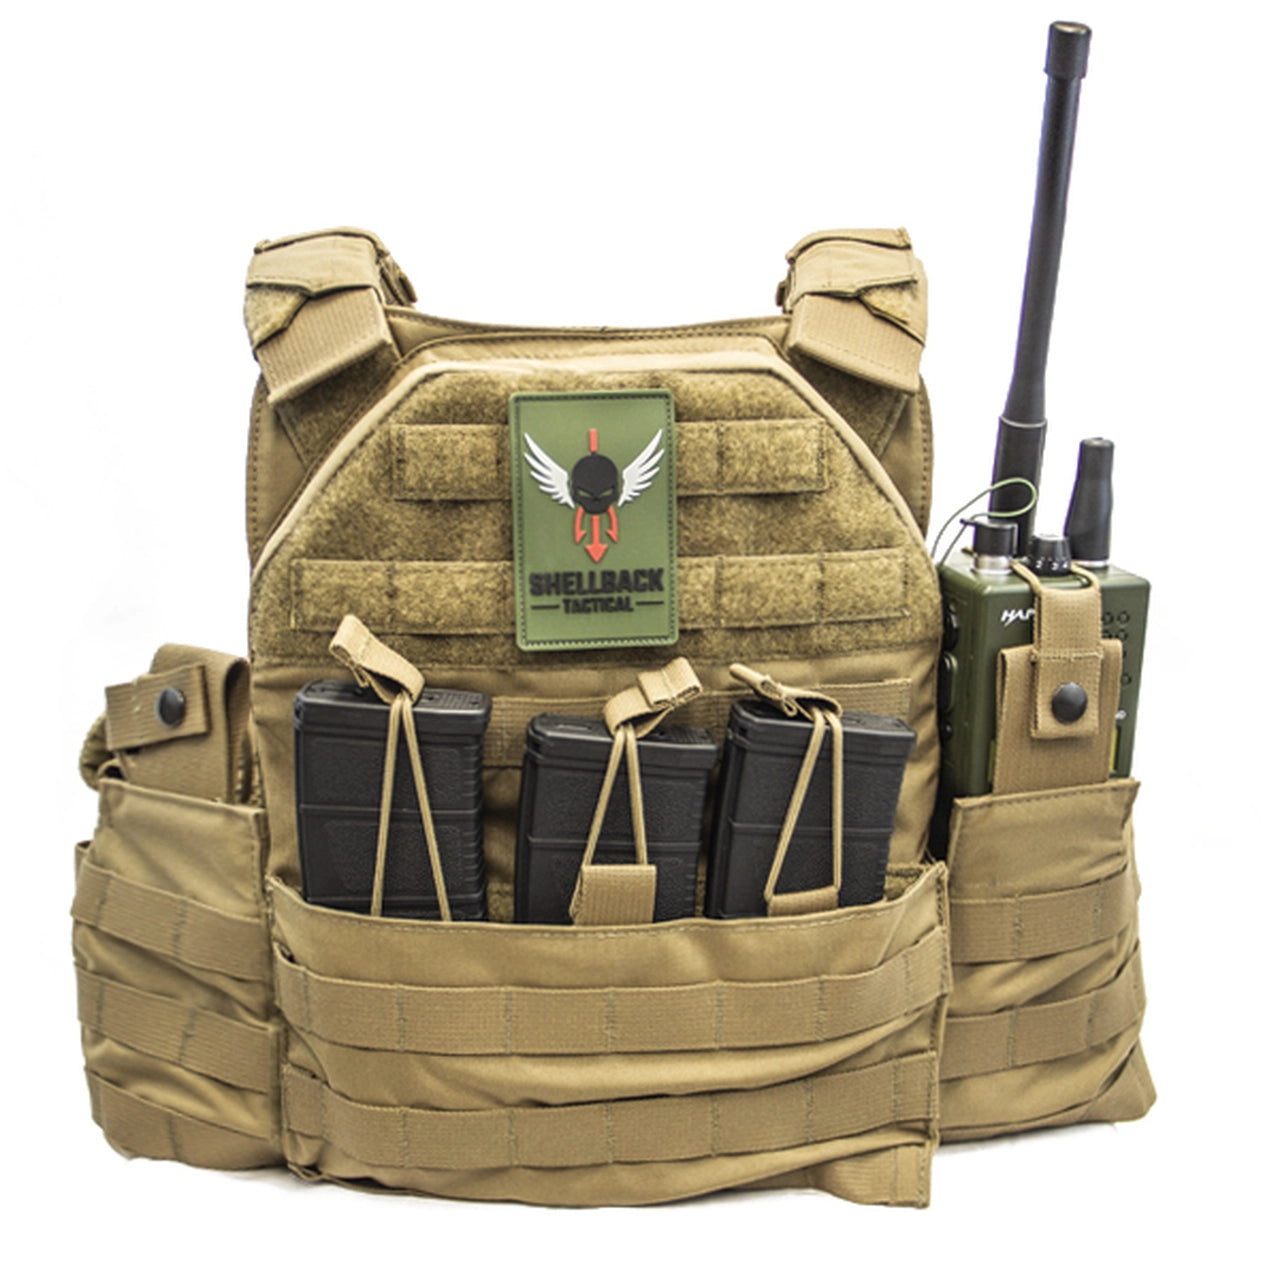 A Shellback Tactical SF Plate Carrier, a combat ready, modular and low profile plate carrier with a radio attached.